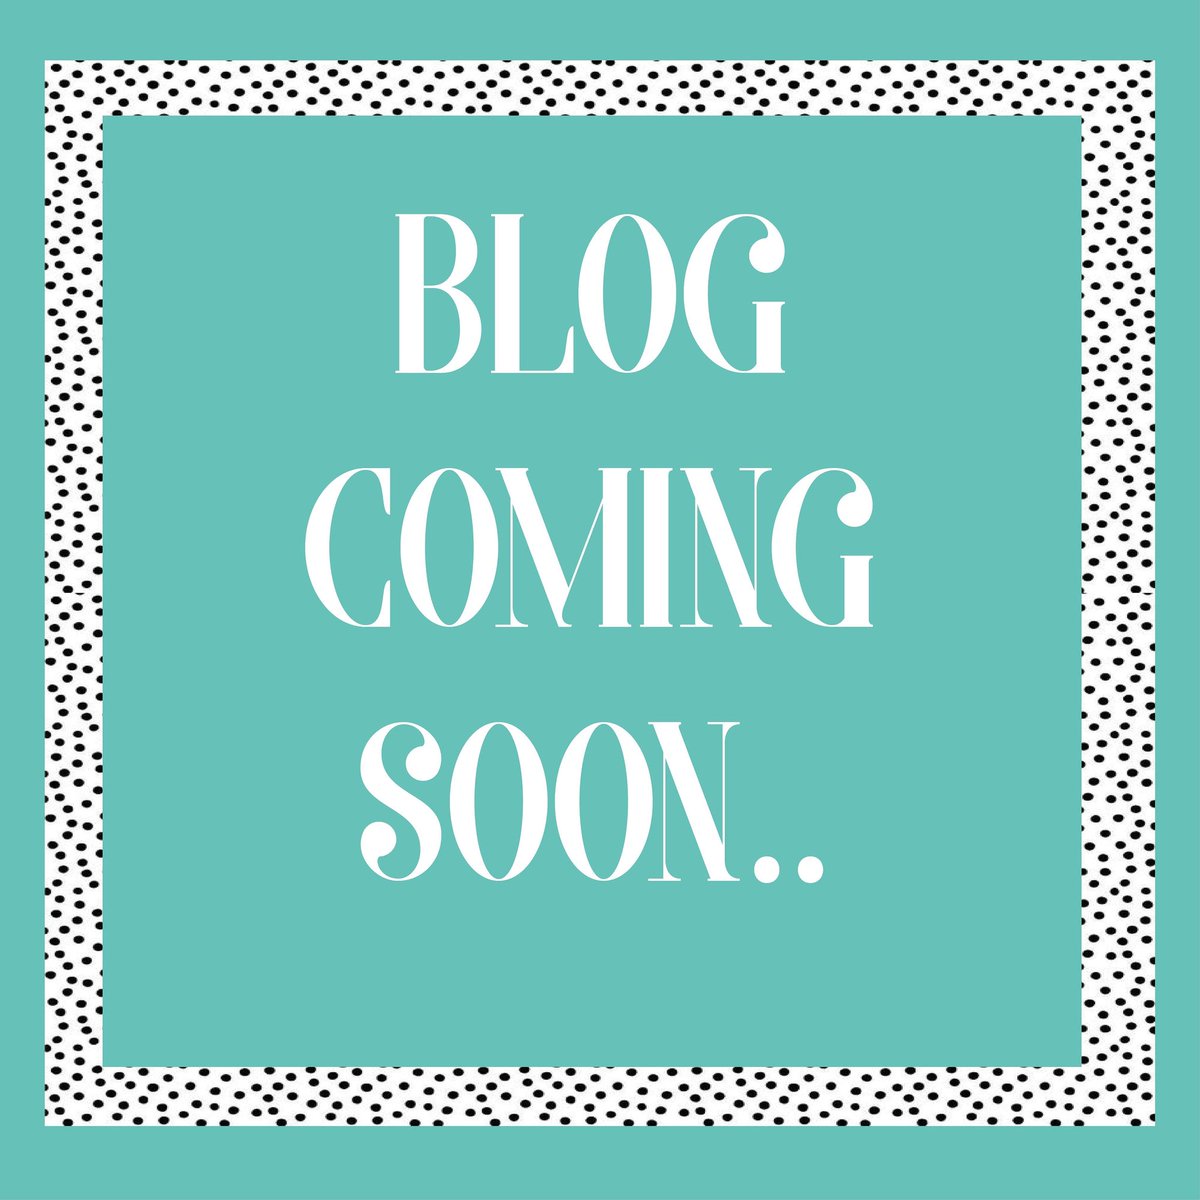 We have been working hard behind the scenes to build a creative blog so we can share all our skills with you! Launching Friday 12th June 12noon!
#newblog #blogger #bloglaunch